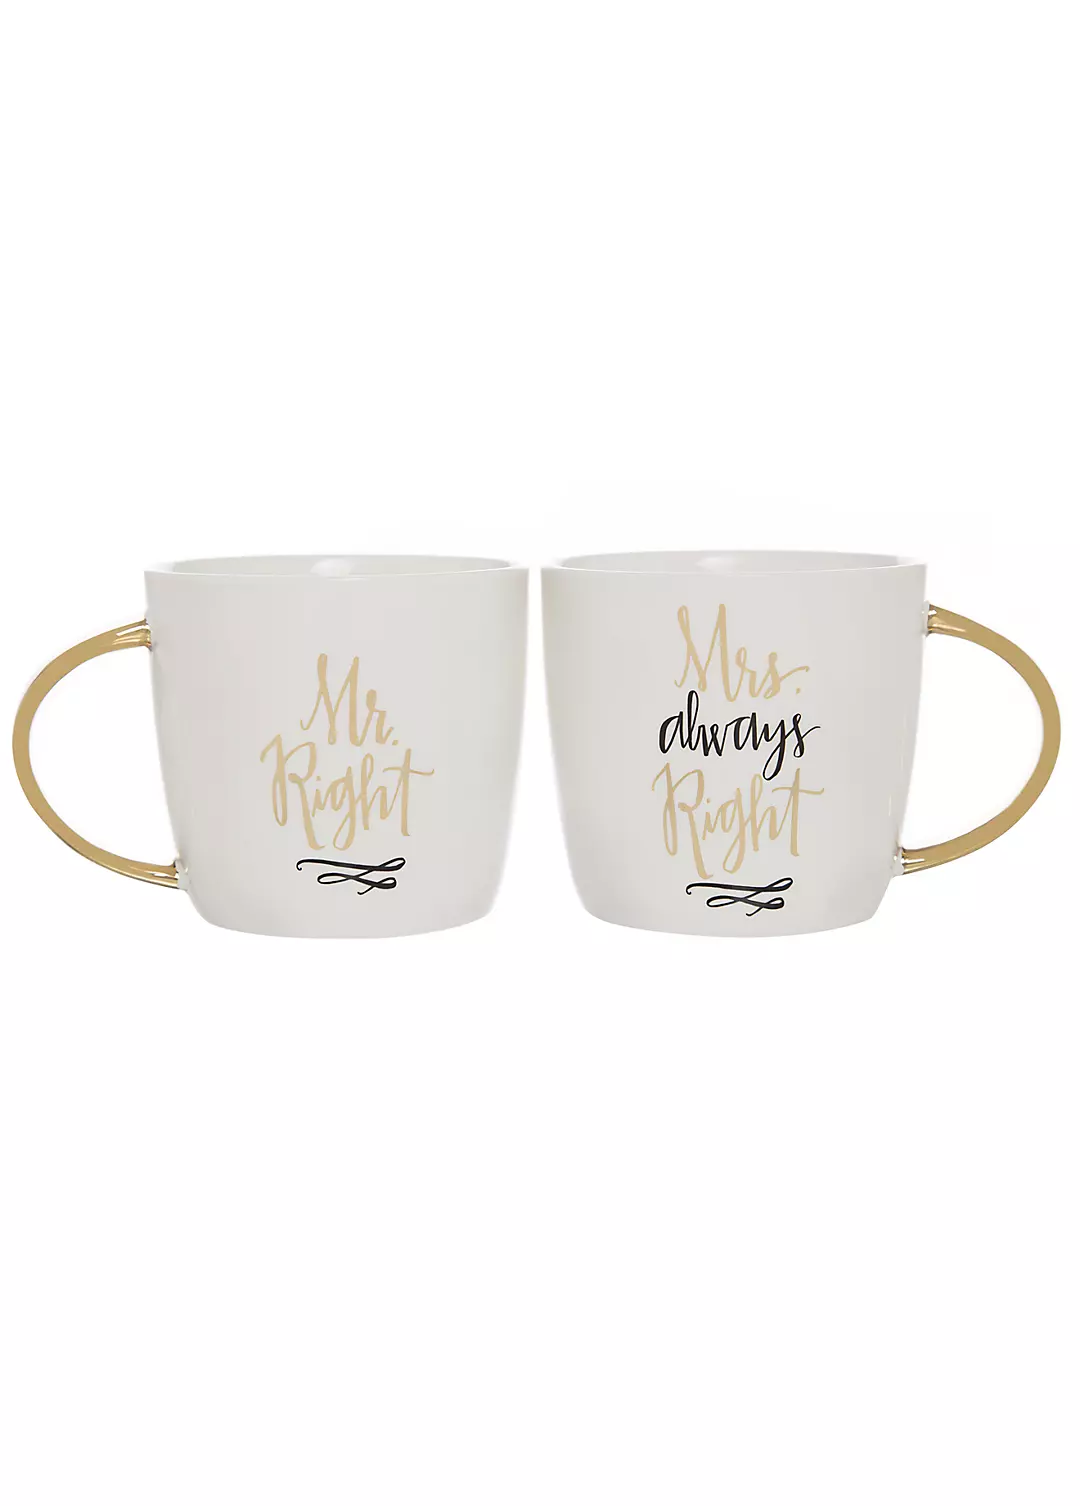 Mr Right and Mrs Always Right Mugs Set of 2 Image